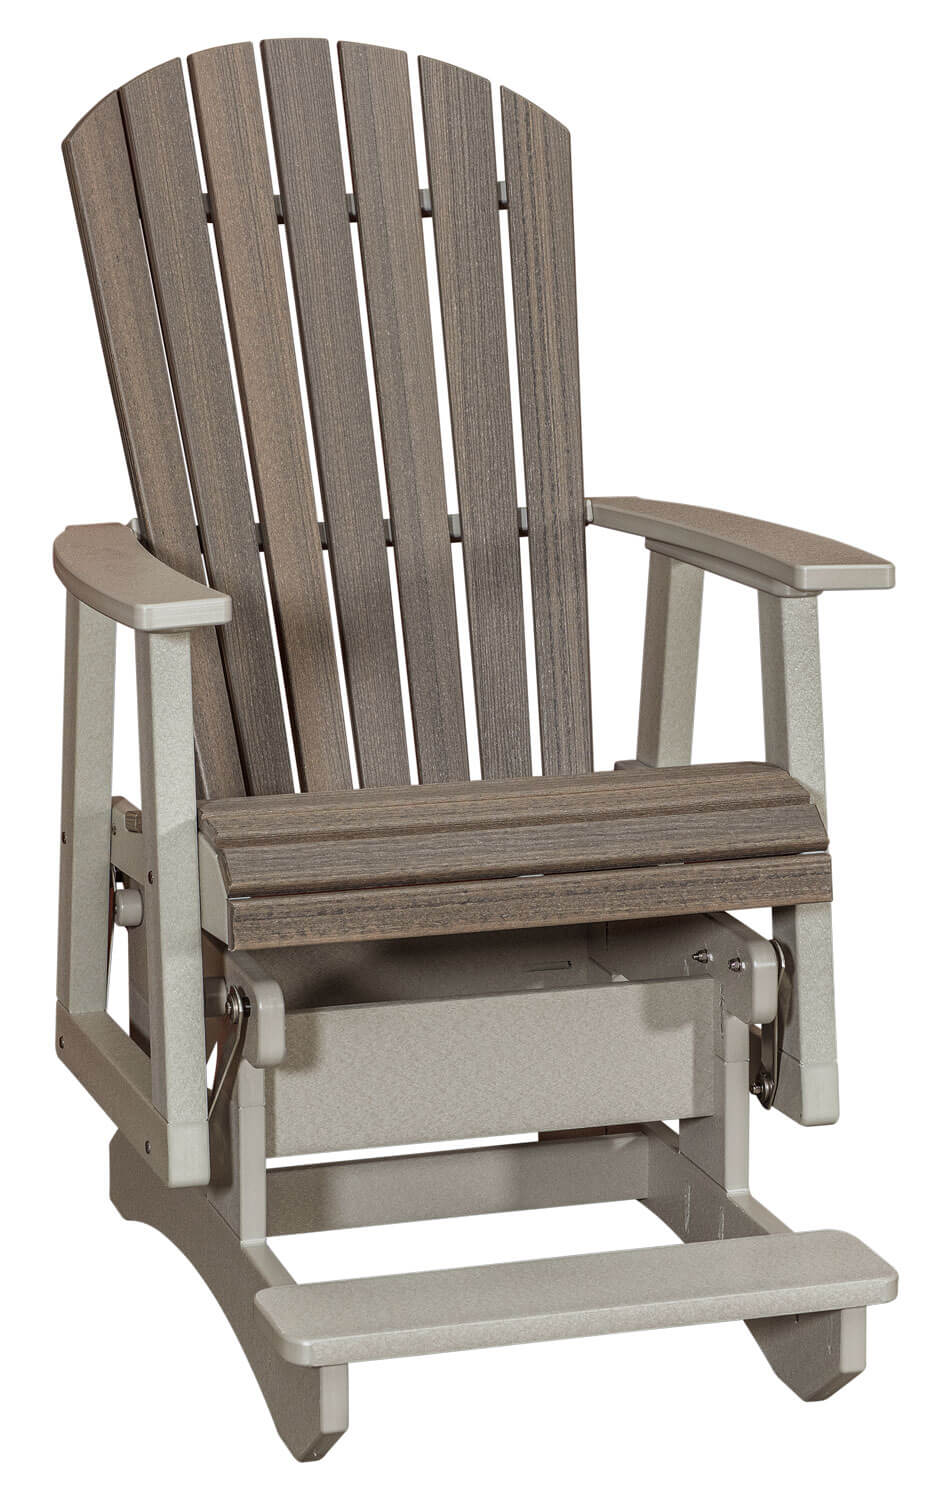 EC Woods EZ Glide Outdoor Poly Single Balcony Glider Shown in Coastal Gray and Light Gray